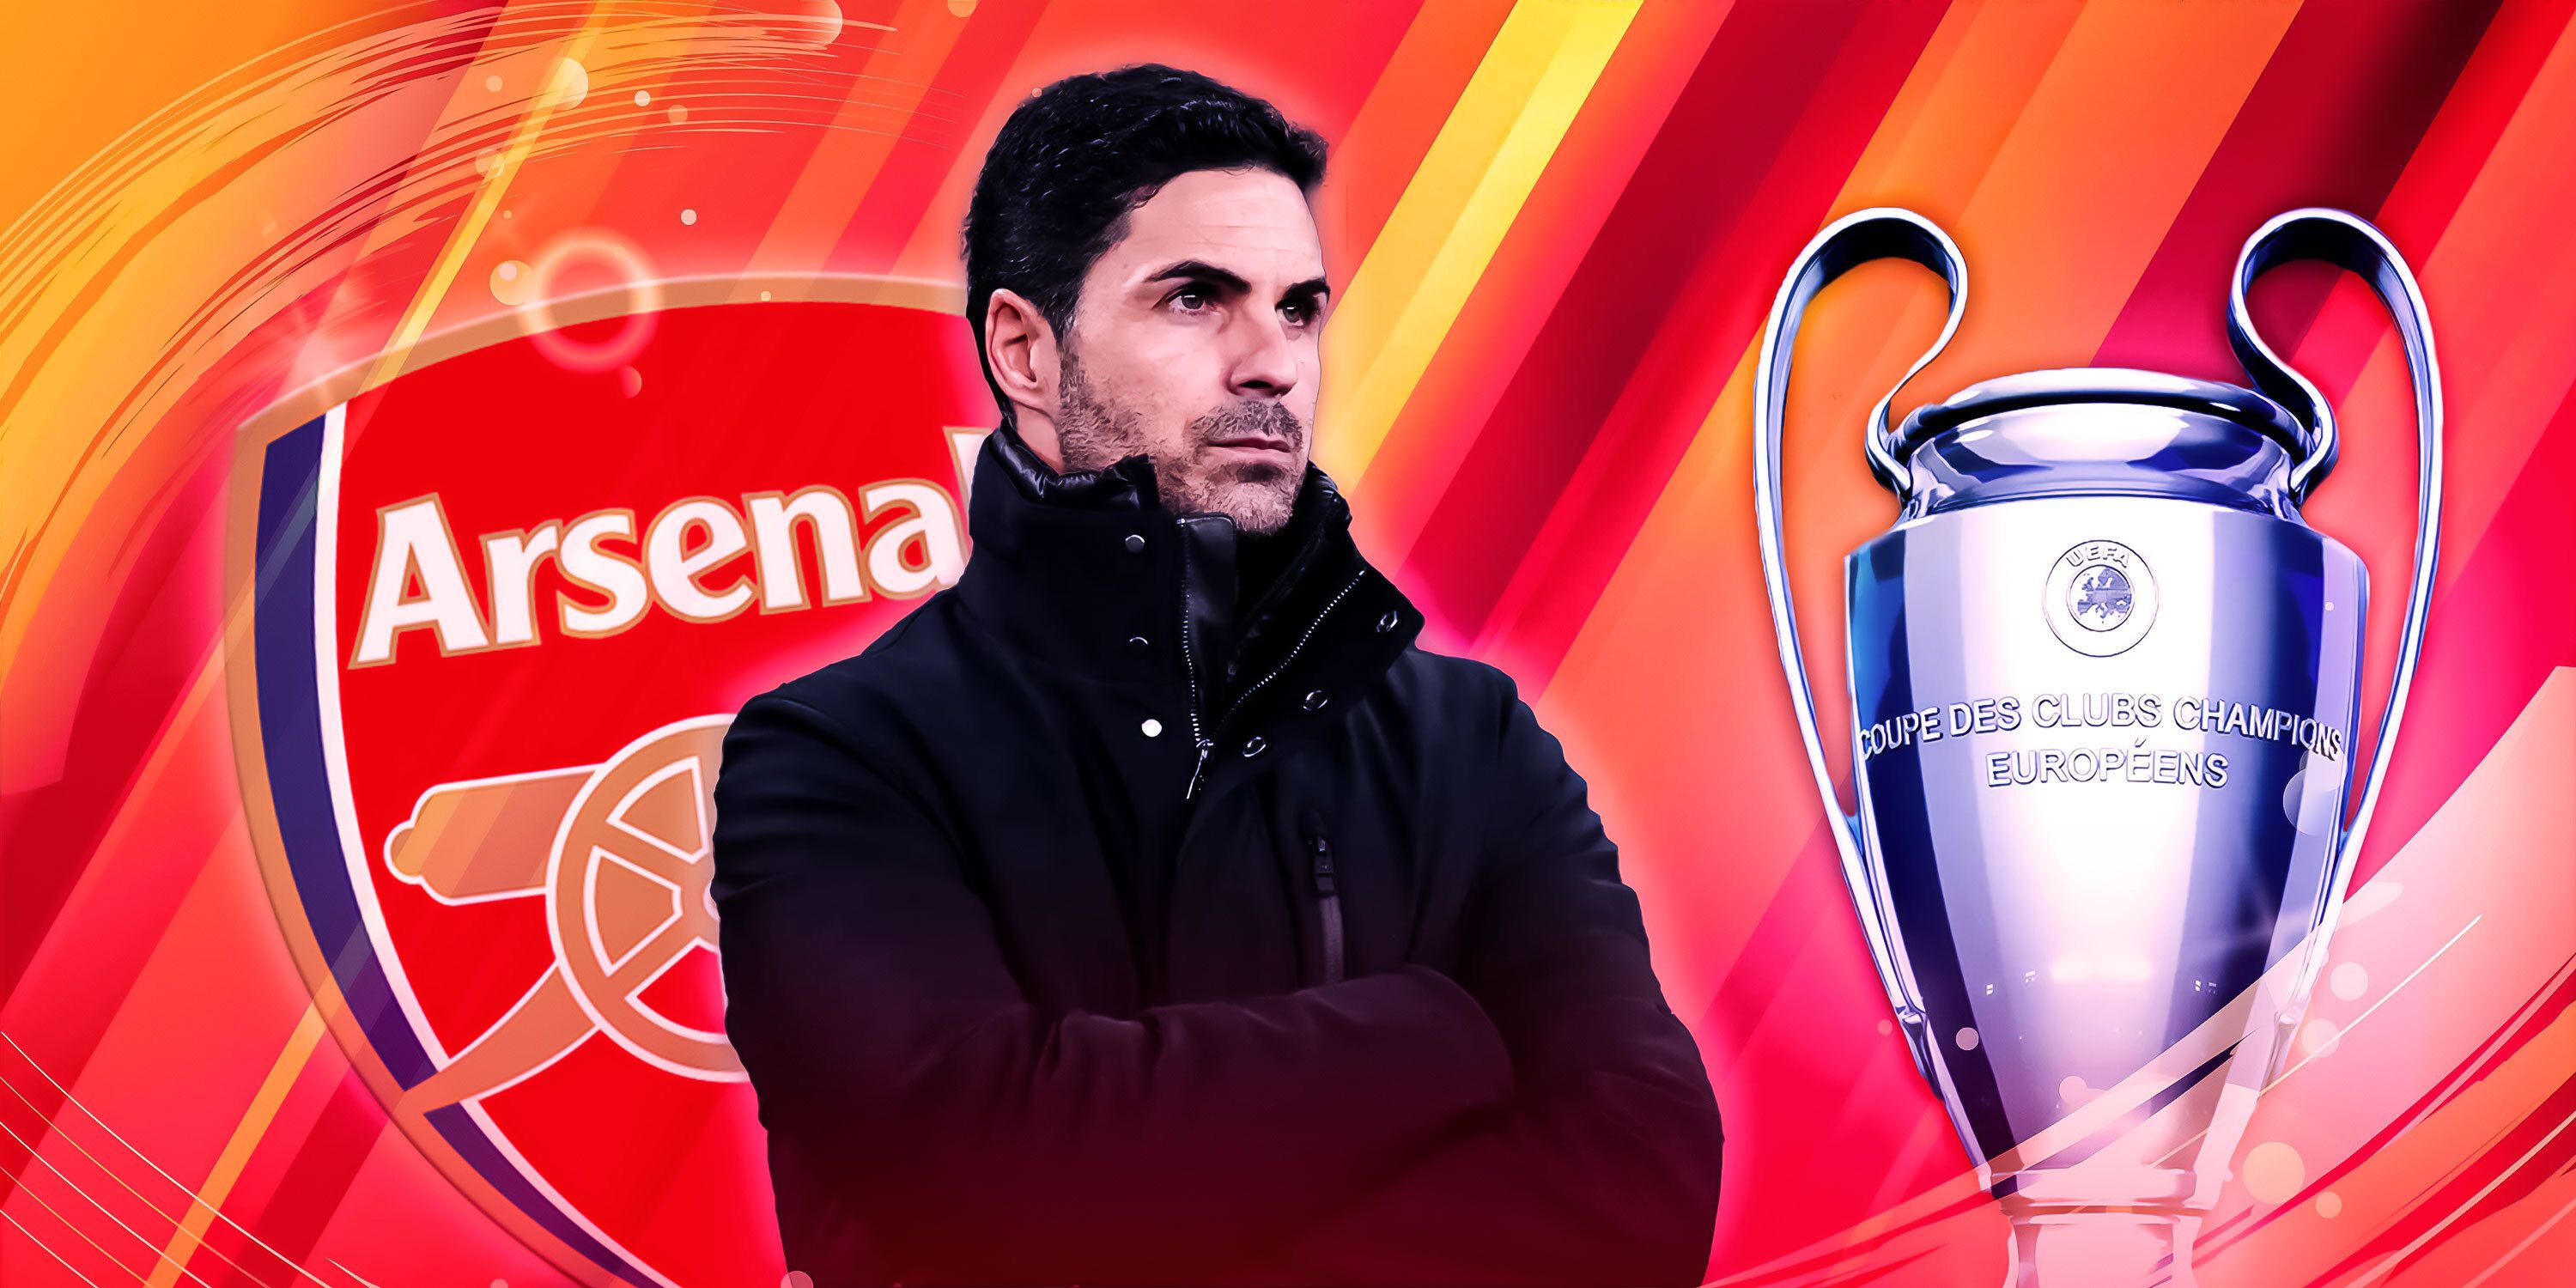 Mikel Arteta looking concerned with a Champions League trophy/theme background - and an Arsenal badge